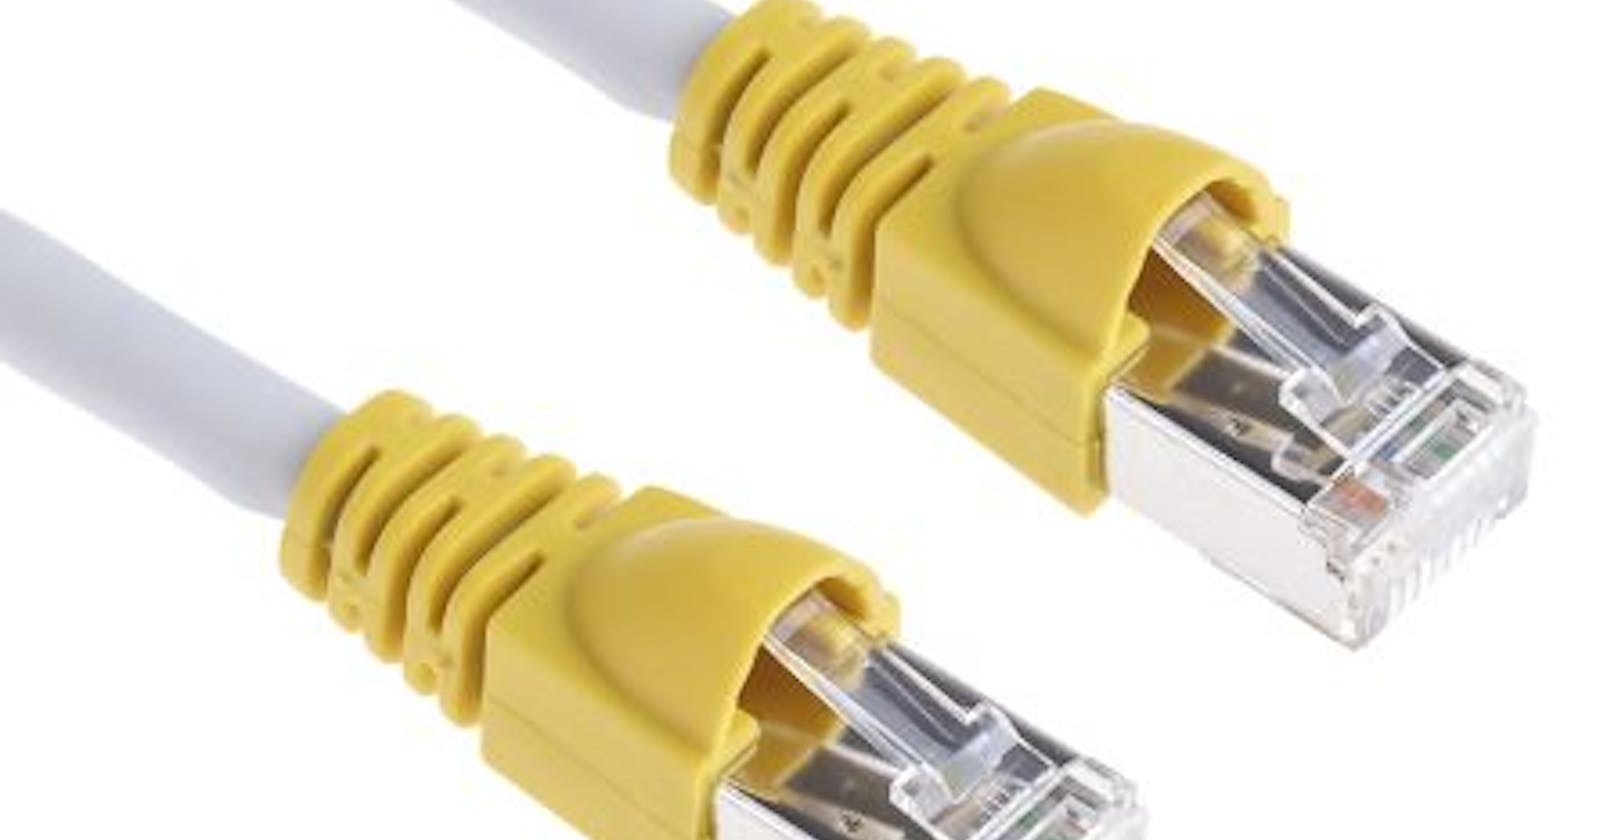 How to make RJ 45 cable?